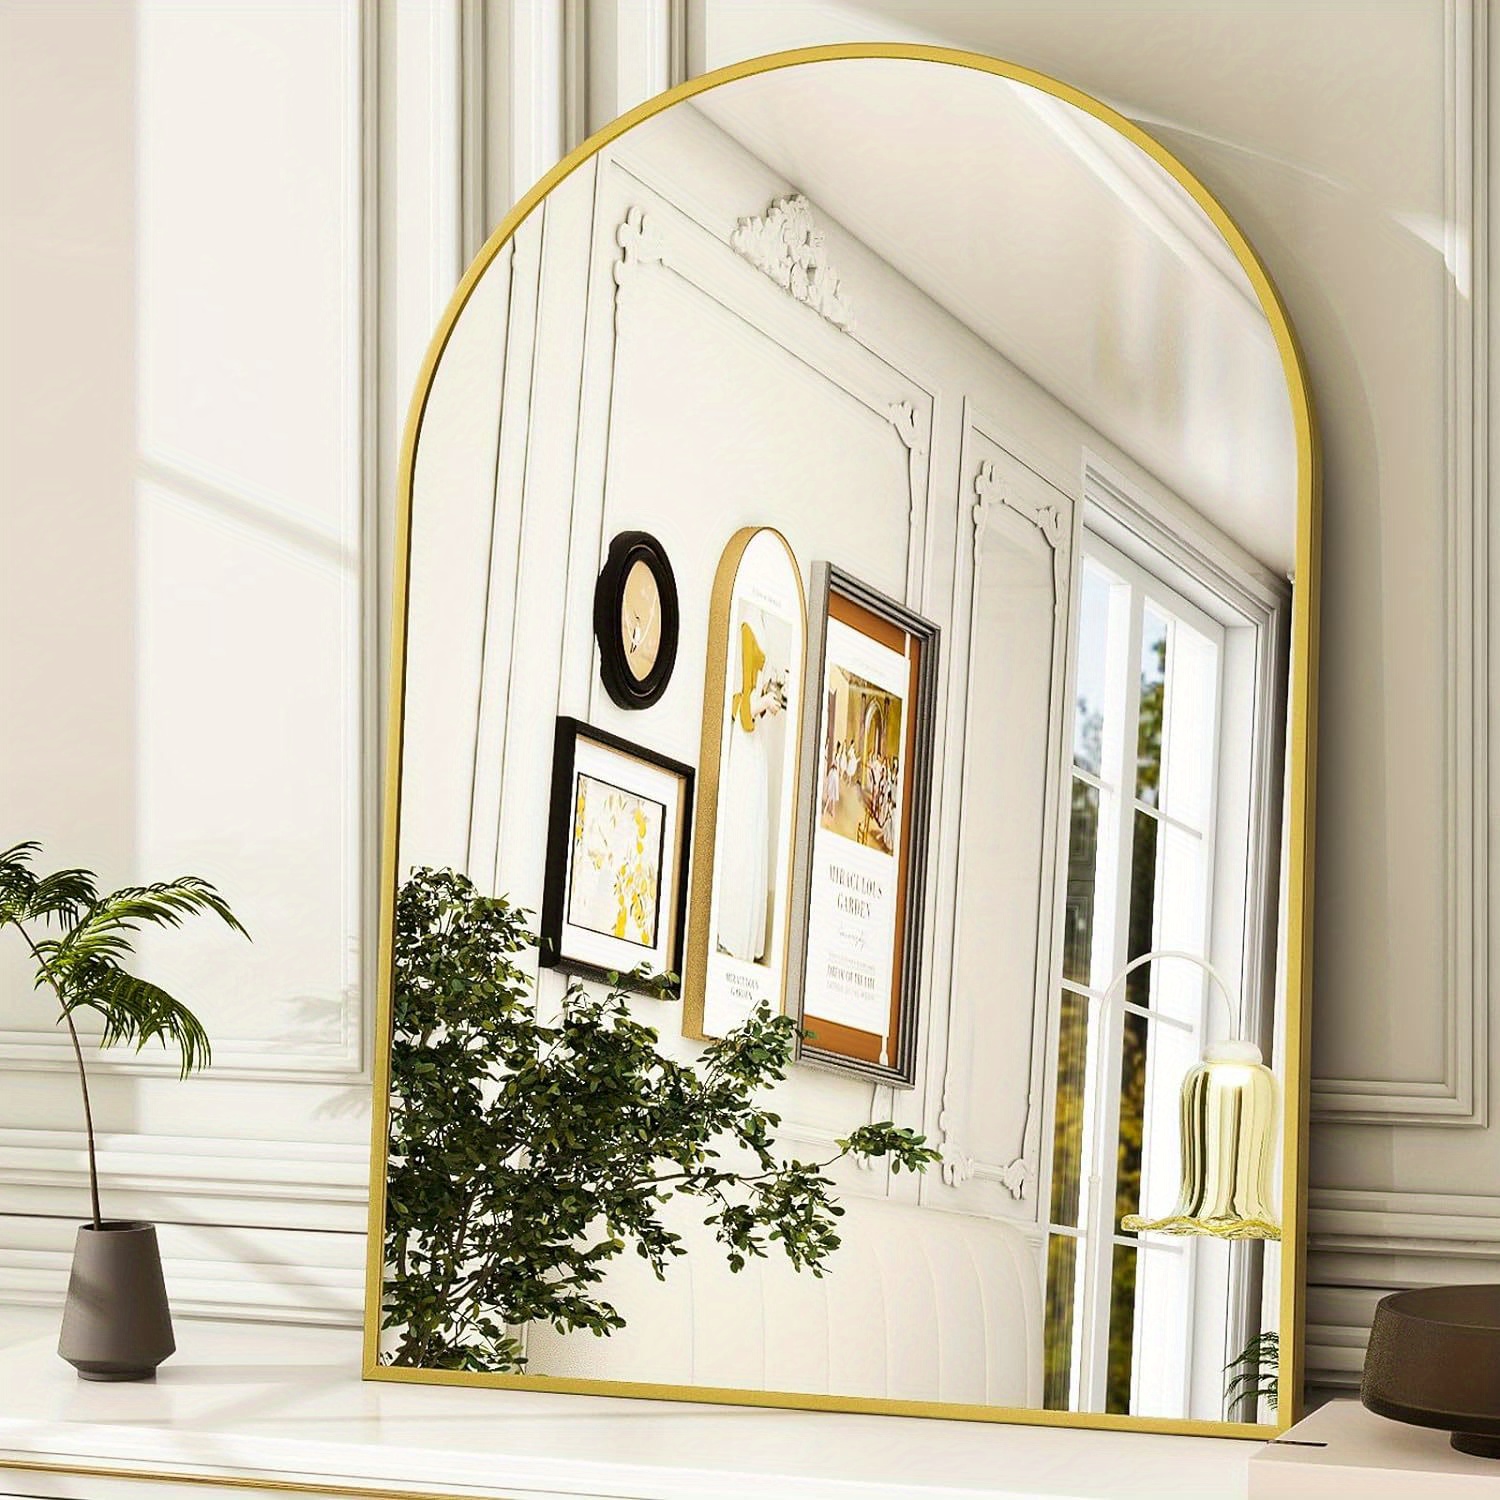 

Arch Bathroom Mirror, Wall Mounted Vanity Mirror With Aluminum Alloy Frame - Ideal For Living Room, Bedroom, Bathroom, And Entryway, Hanging Or Leaning, Golden